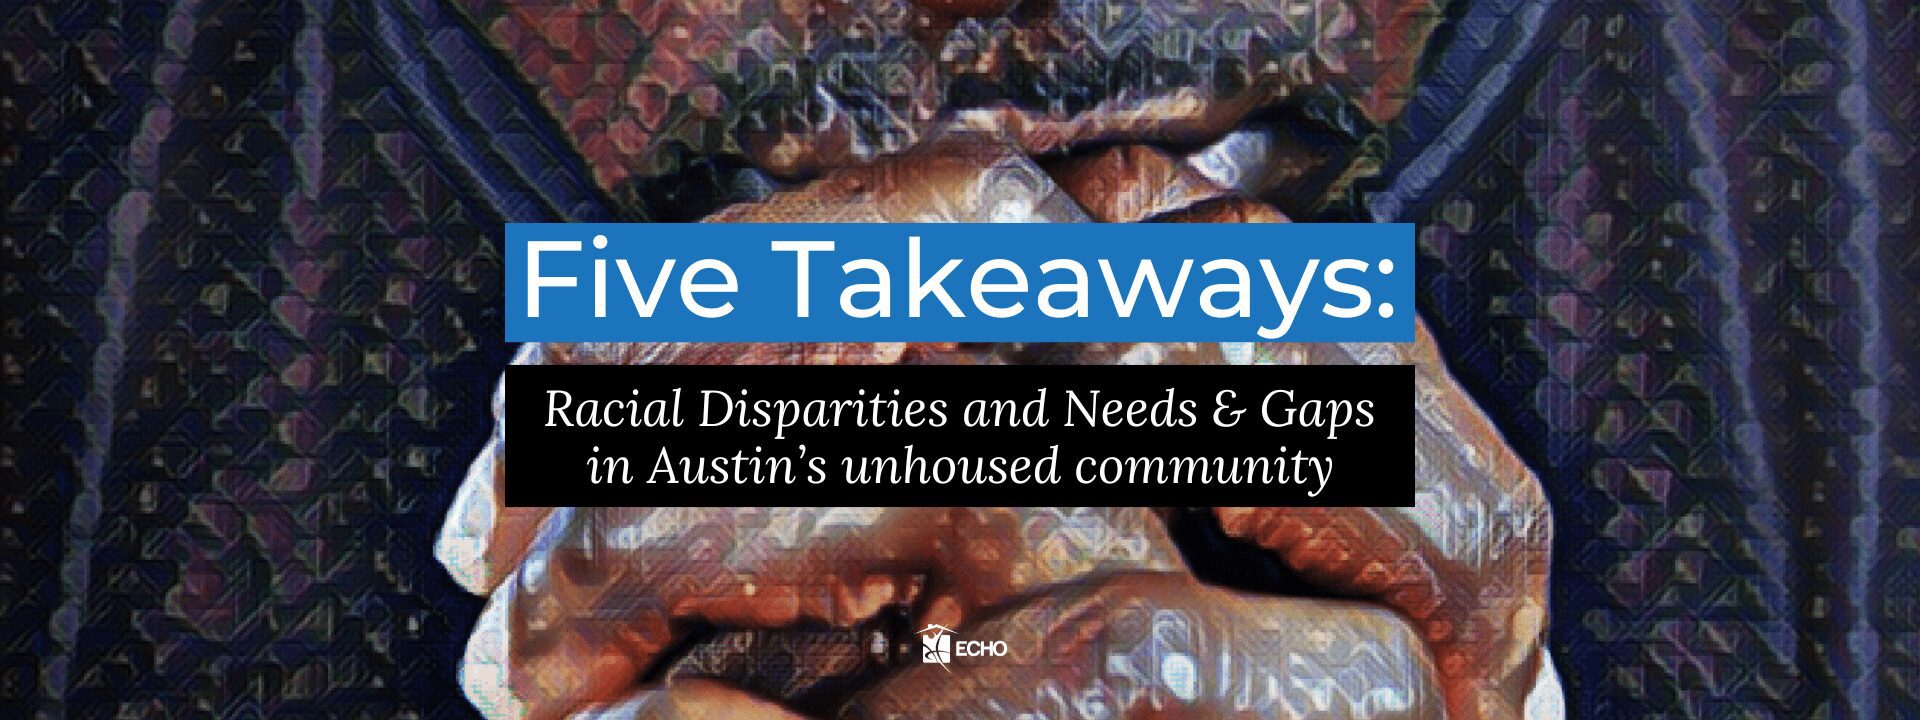 Stylized close-up of clasped hands in front of face with text that says "five takeaways: Racial Disparities and Needs & Gaps in Austin's unhoused community"